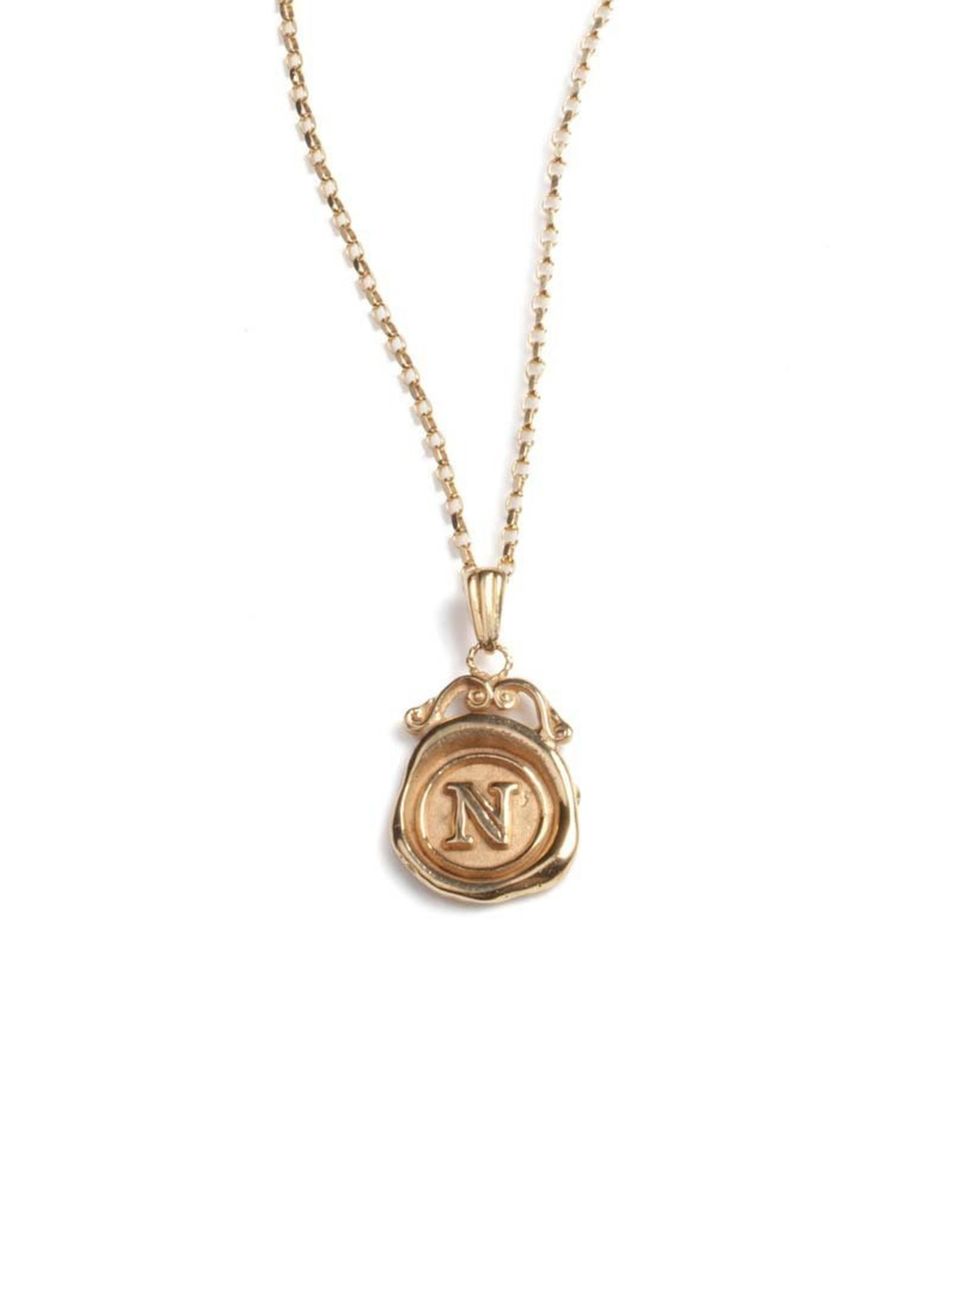 <p>This London designer's quirky personalised pendants make our new season shopping list.</p><p><a href="http://www.jessicadelotz.co.uk/product/9ct-gold-mini-personalised-seal-necklace">Jessica de Lotz</a> necklace, £395</p>